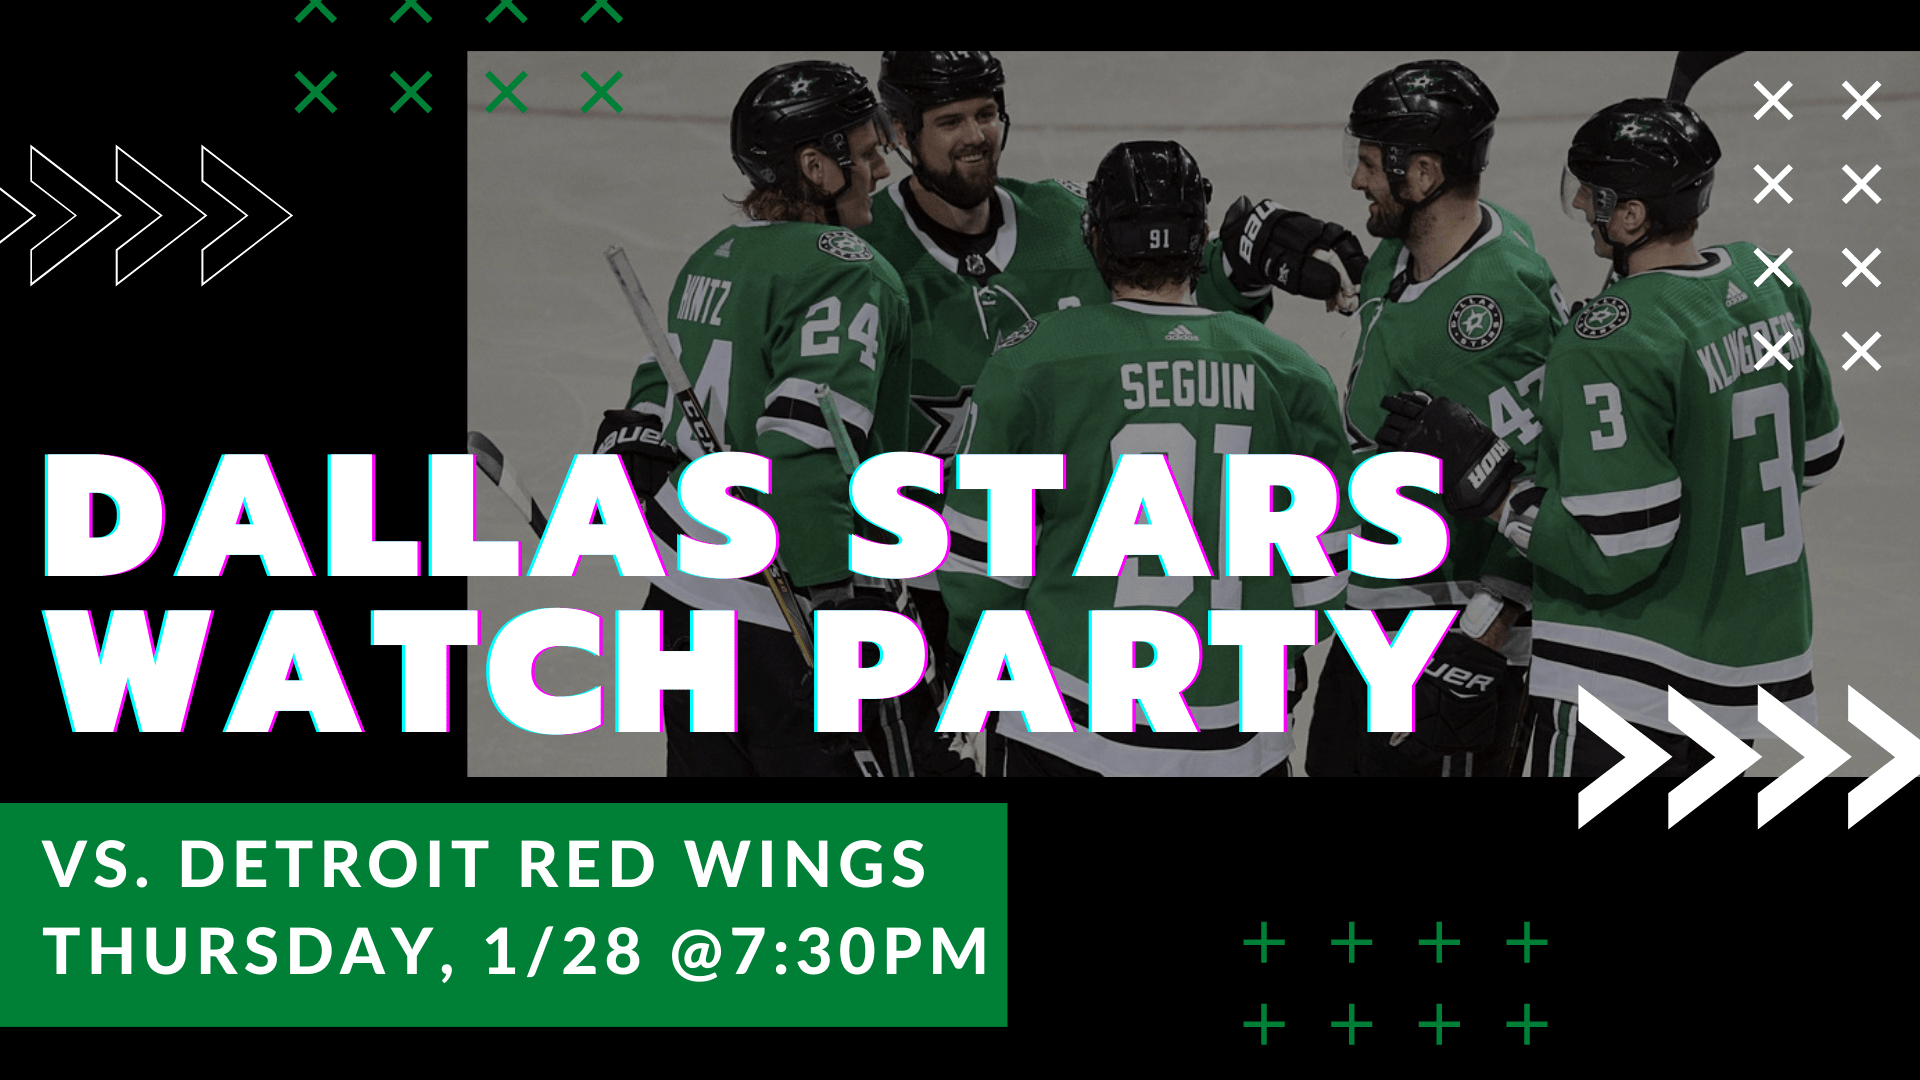 Red Wings v. Stars Watch Party - hero